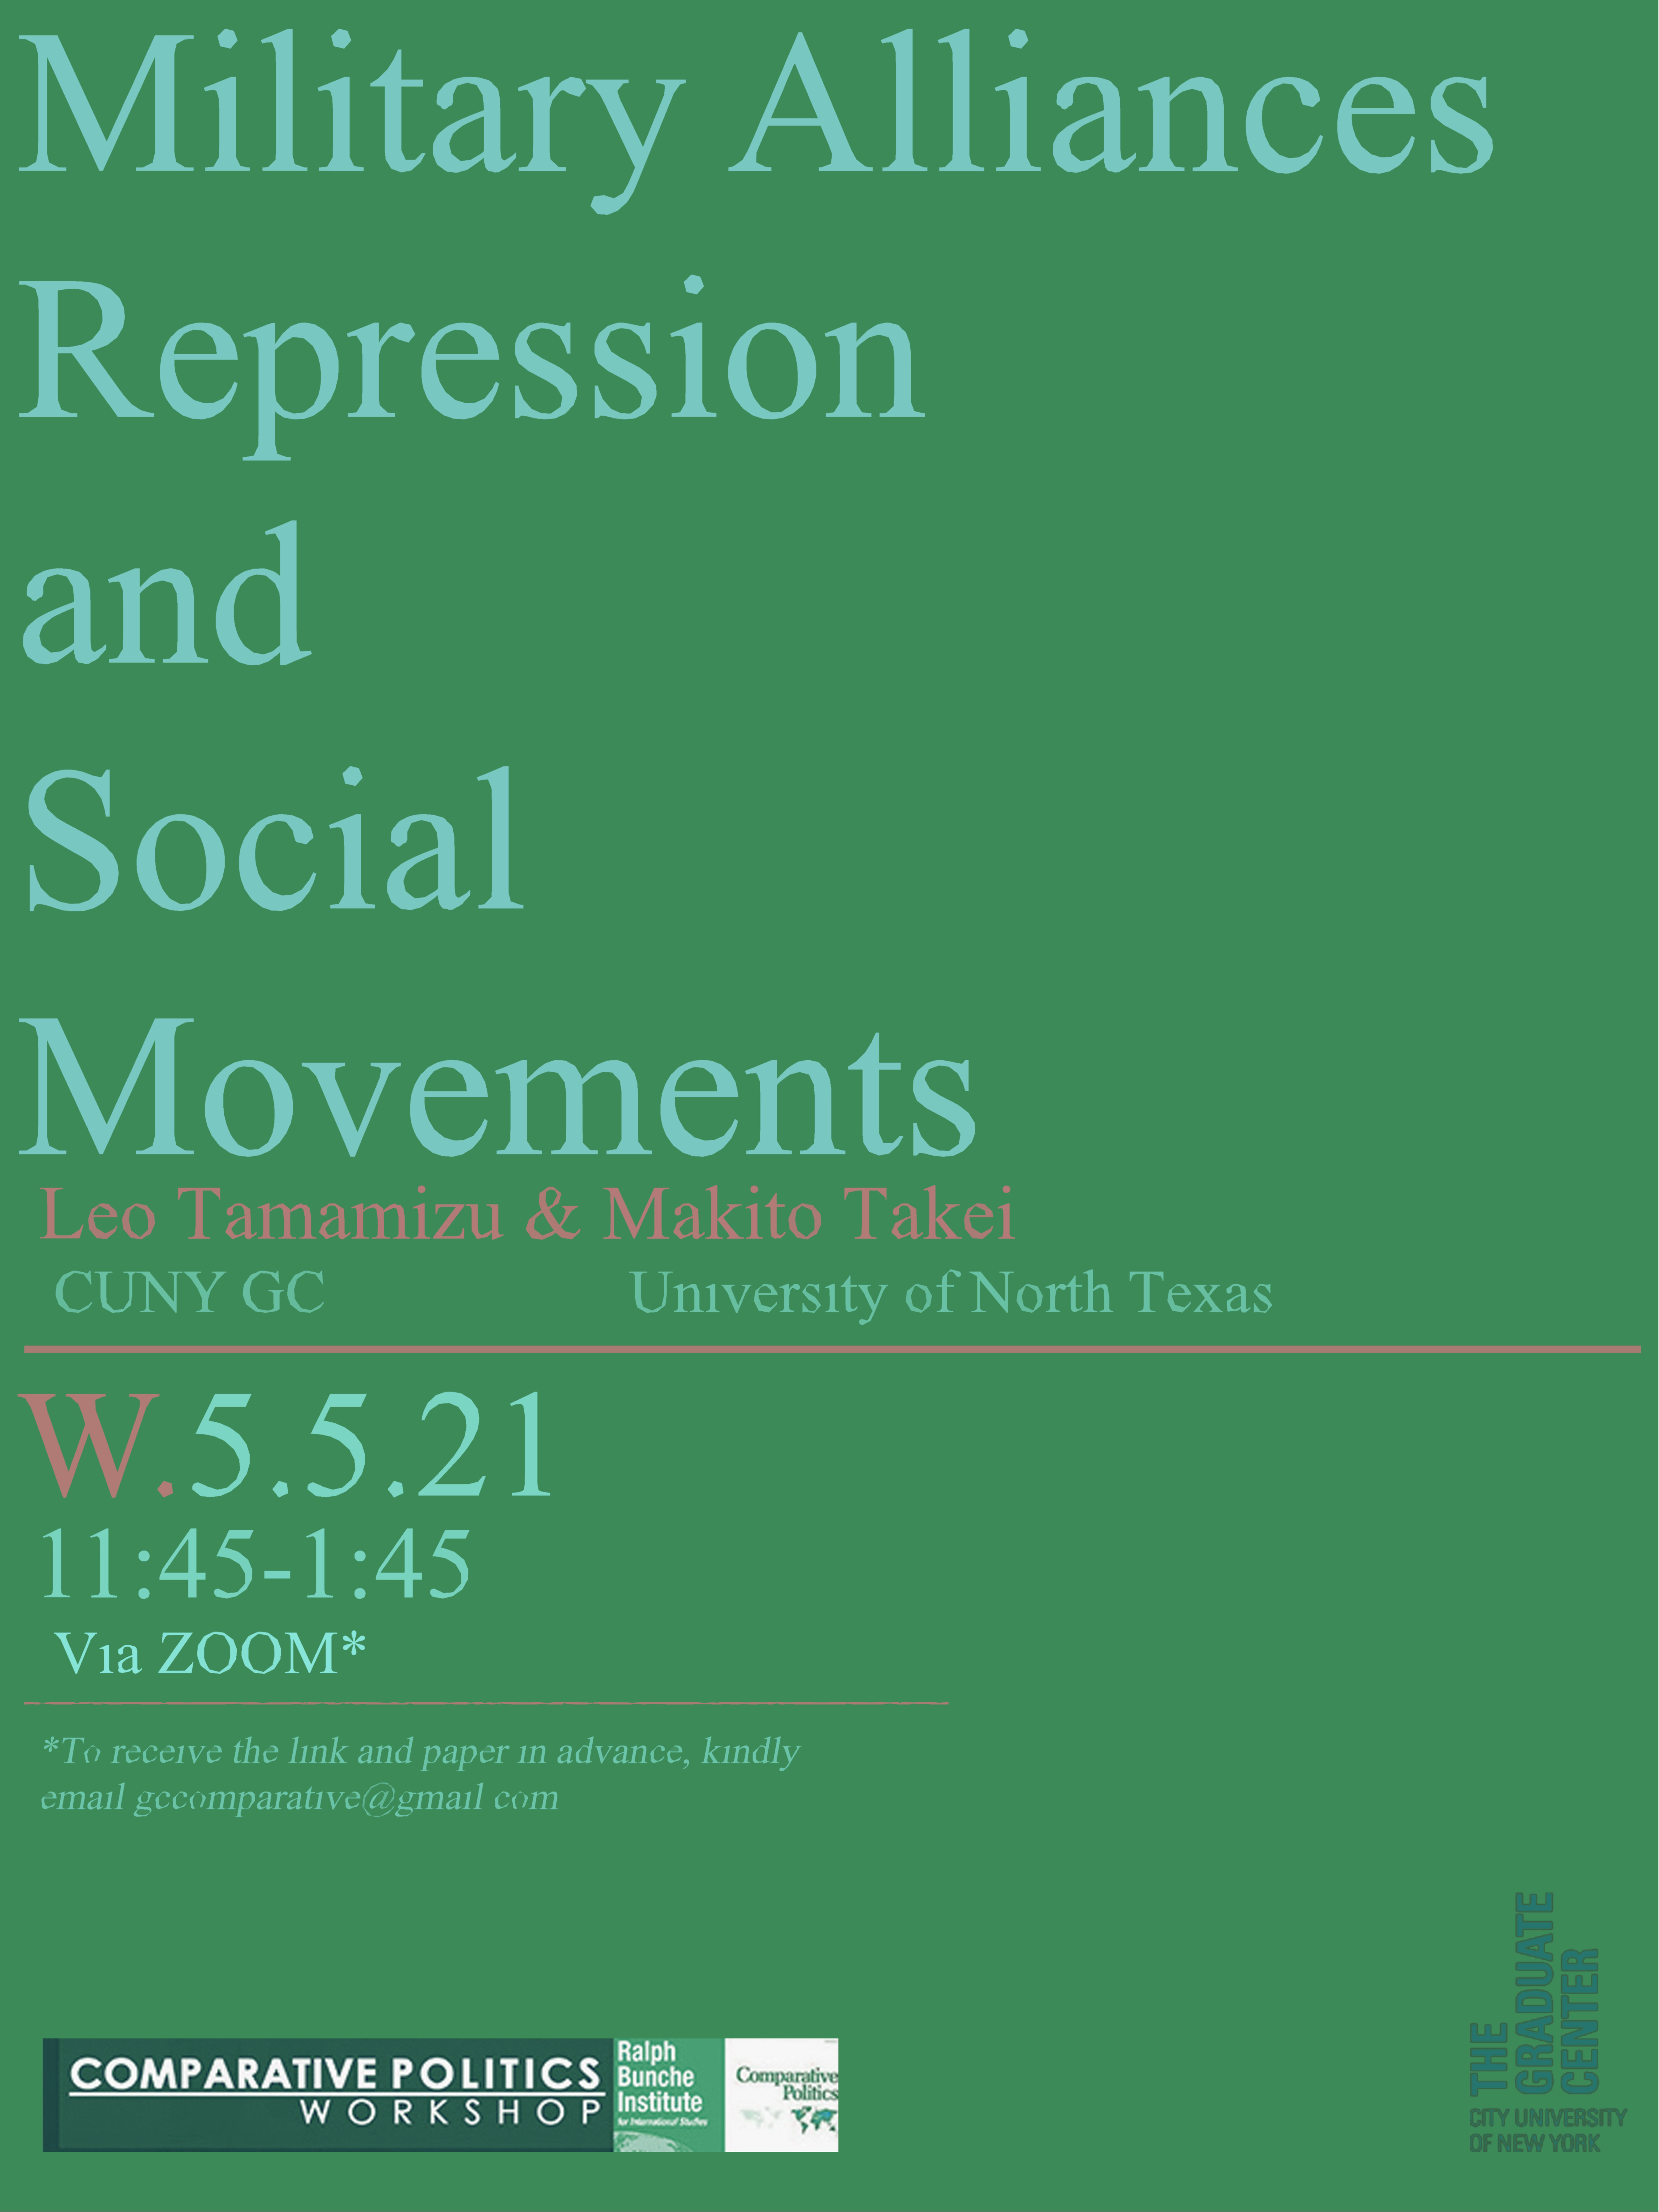 Comparative Politics Workshop: Makito Takei and Leo Tamamizu, "Military Alliances, Repression, and Social Movements," Wednesday, May 5, 11:45am-1:45pm